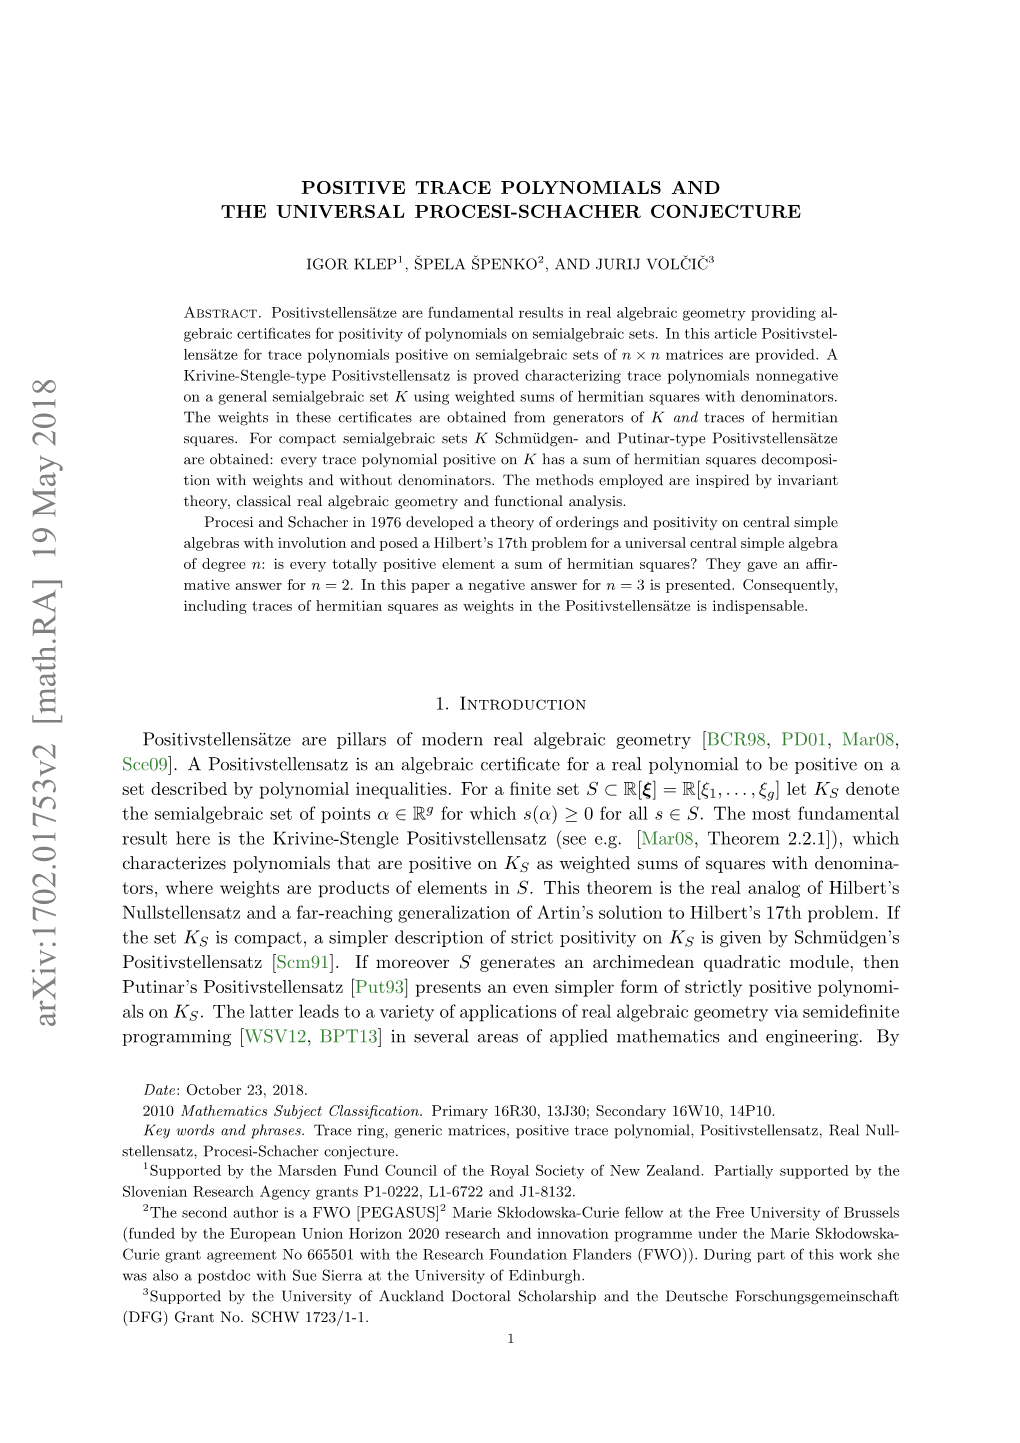 Positive Trace Polynomials and the Universal Procesi-Schacher